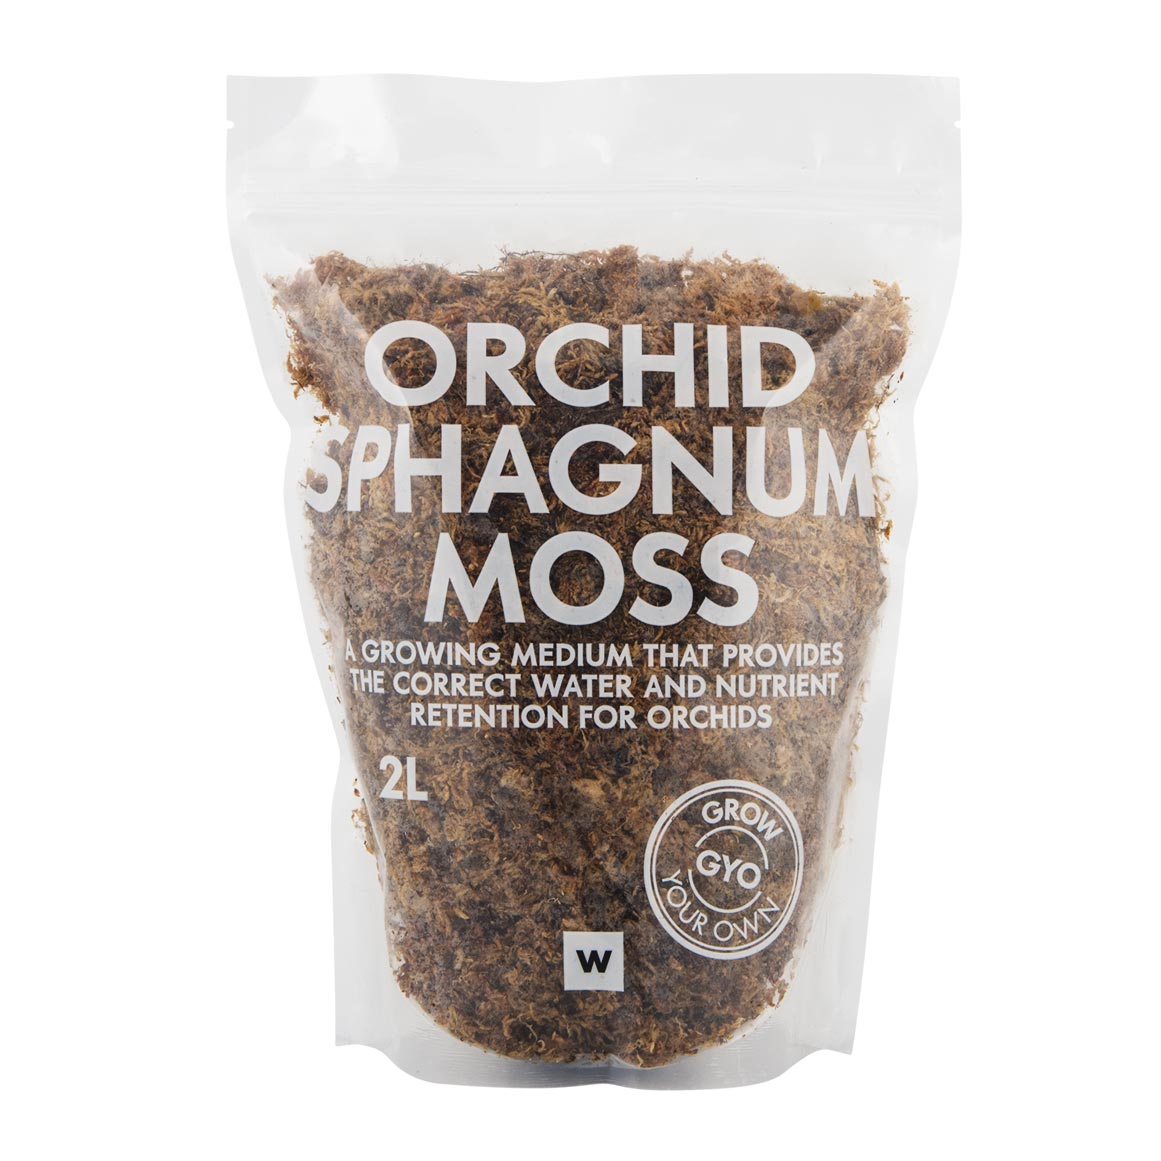 Orchid Sphagnum Moss 2 L